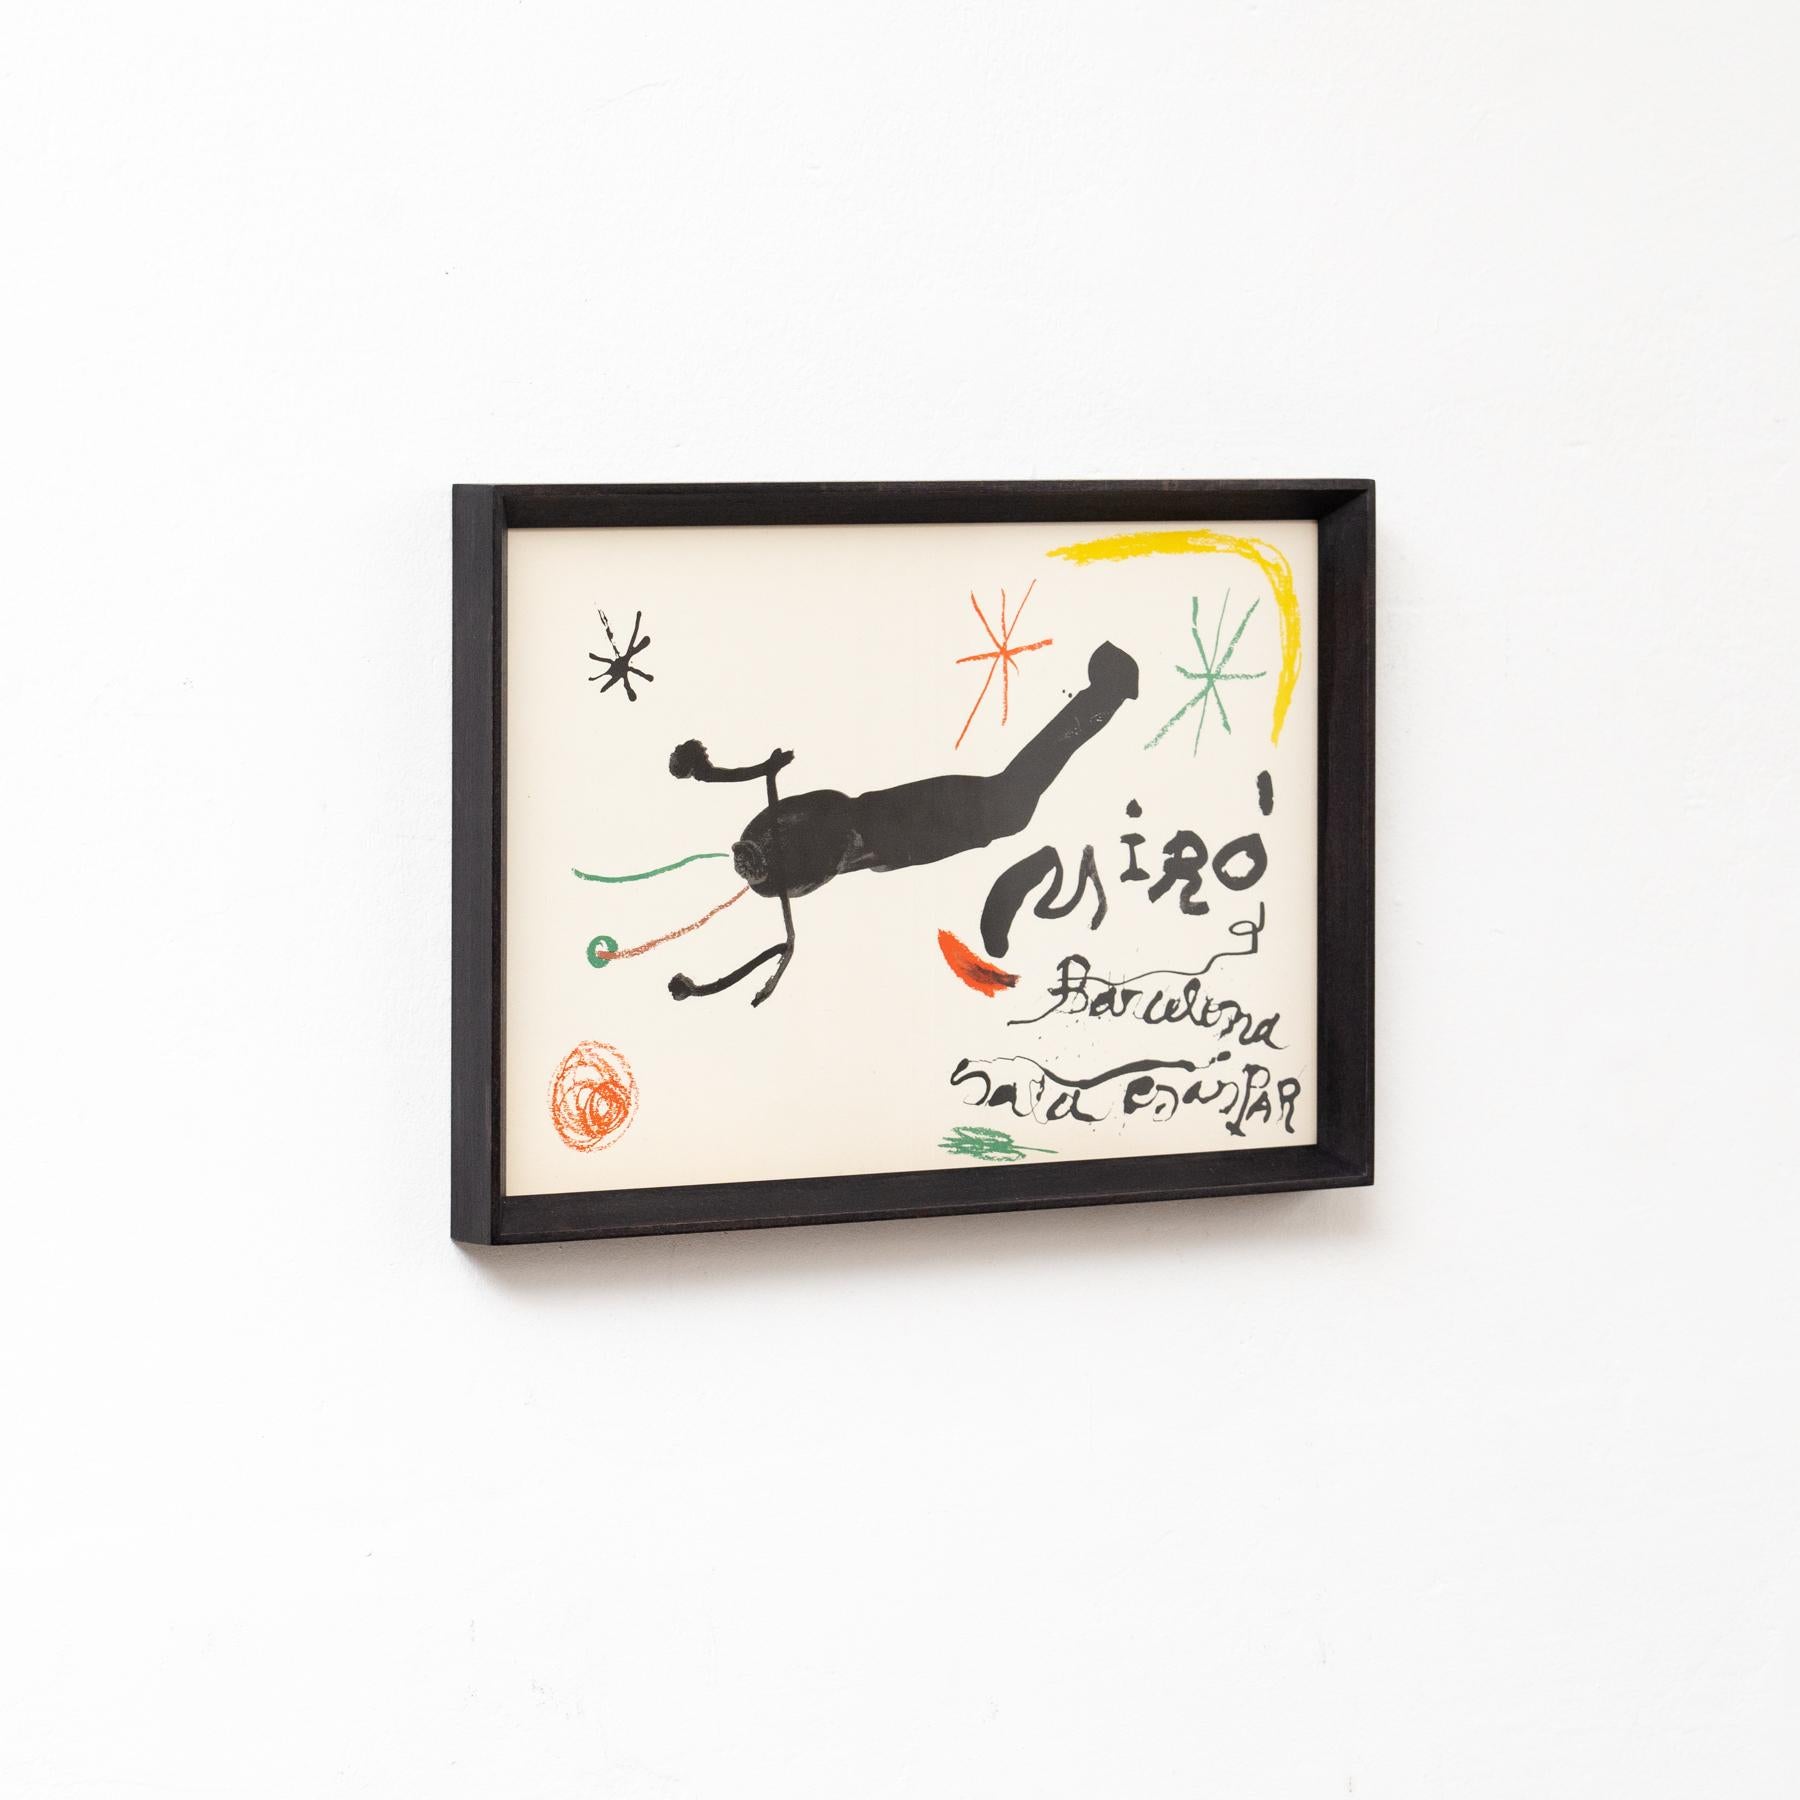 Spanish Vibrant Expression: Joan Miro's Color Framed Lithography, 1964  For Sale